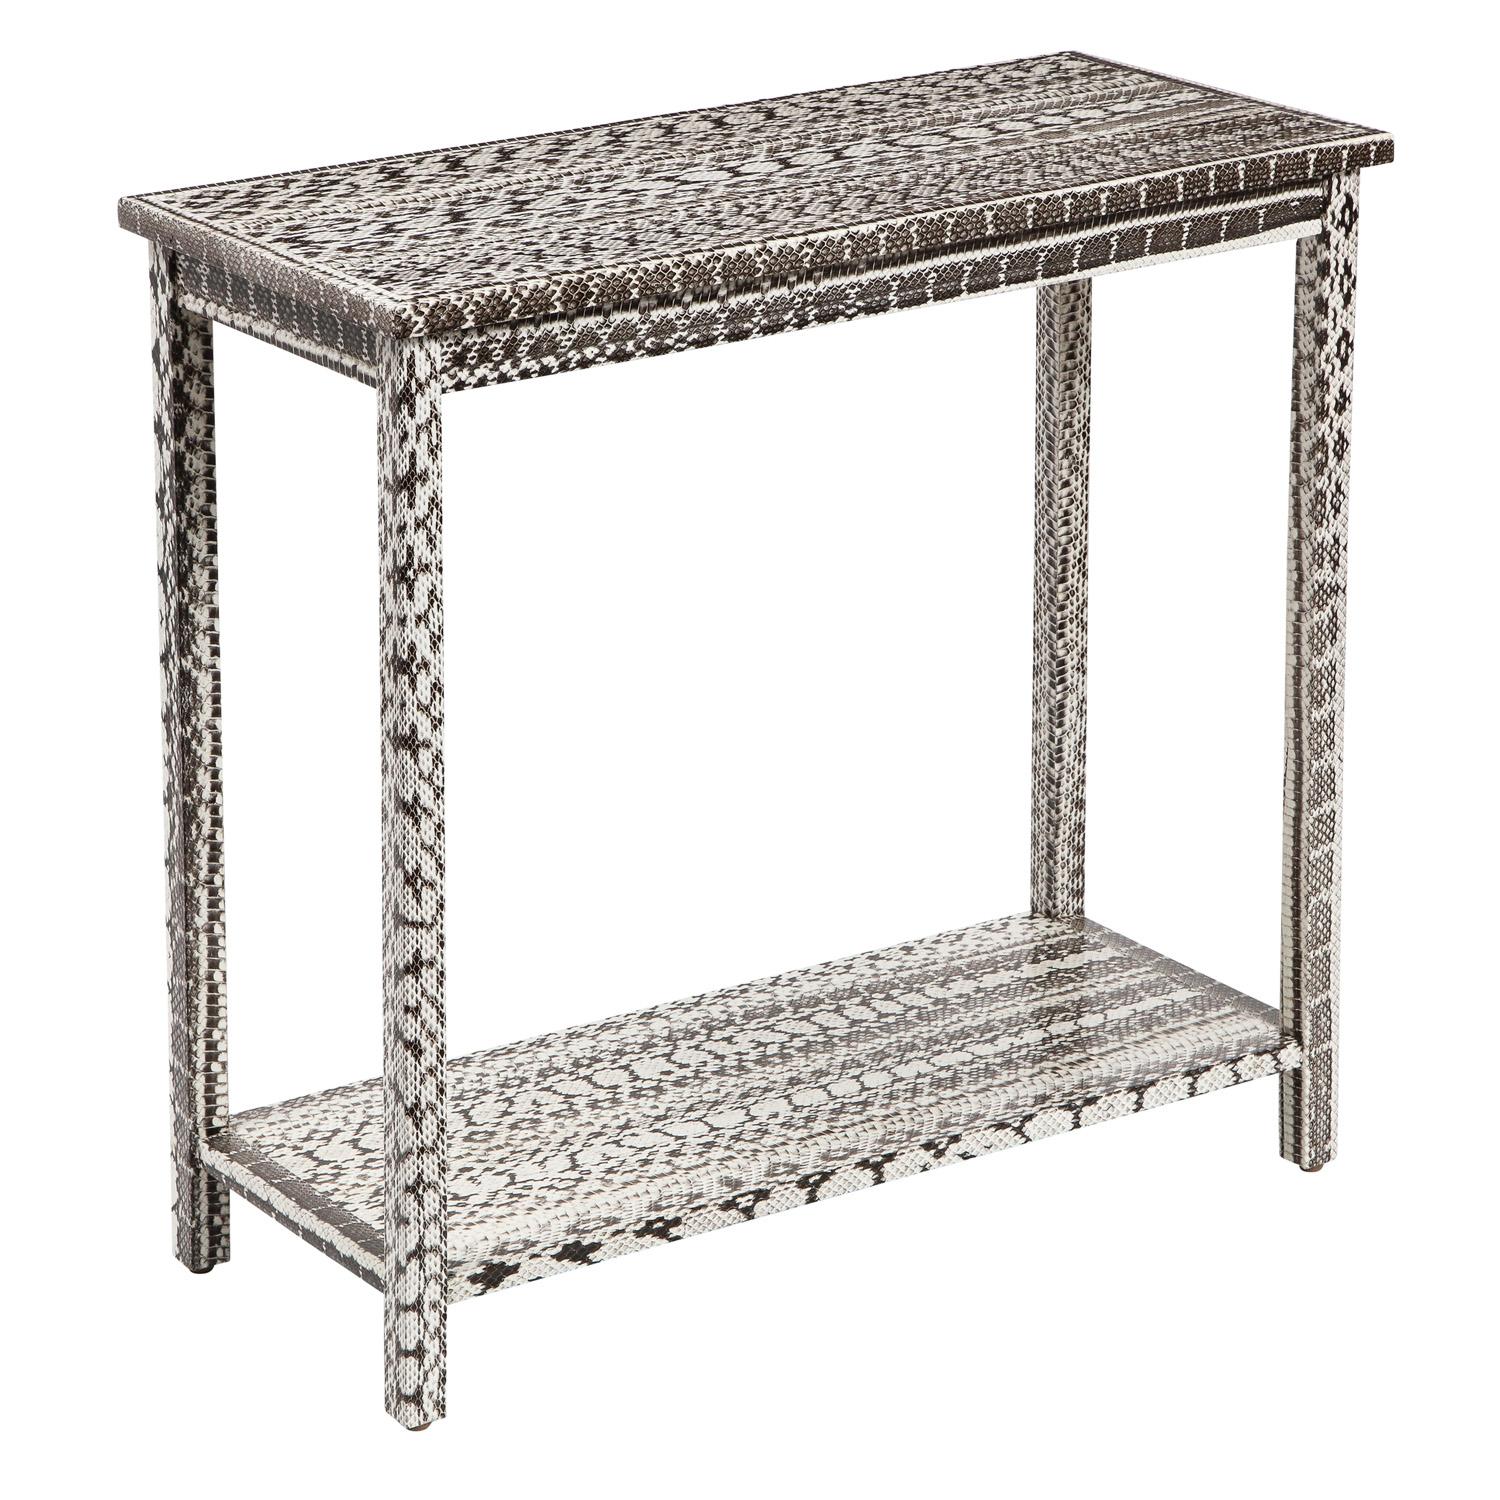 2-tier console table in black and white snake skin by Evan Lobel for Lobel Originals, American 2022. This piece is meticulously crafted and stunning in person.